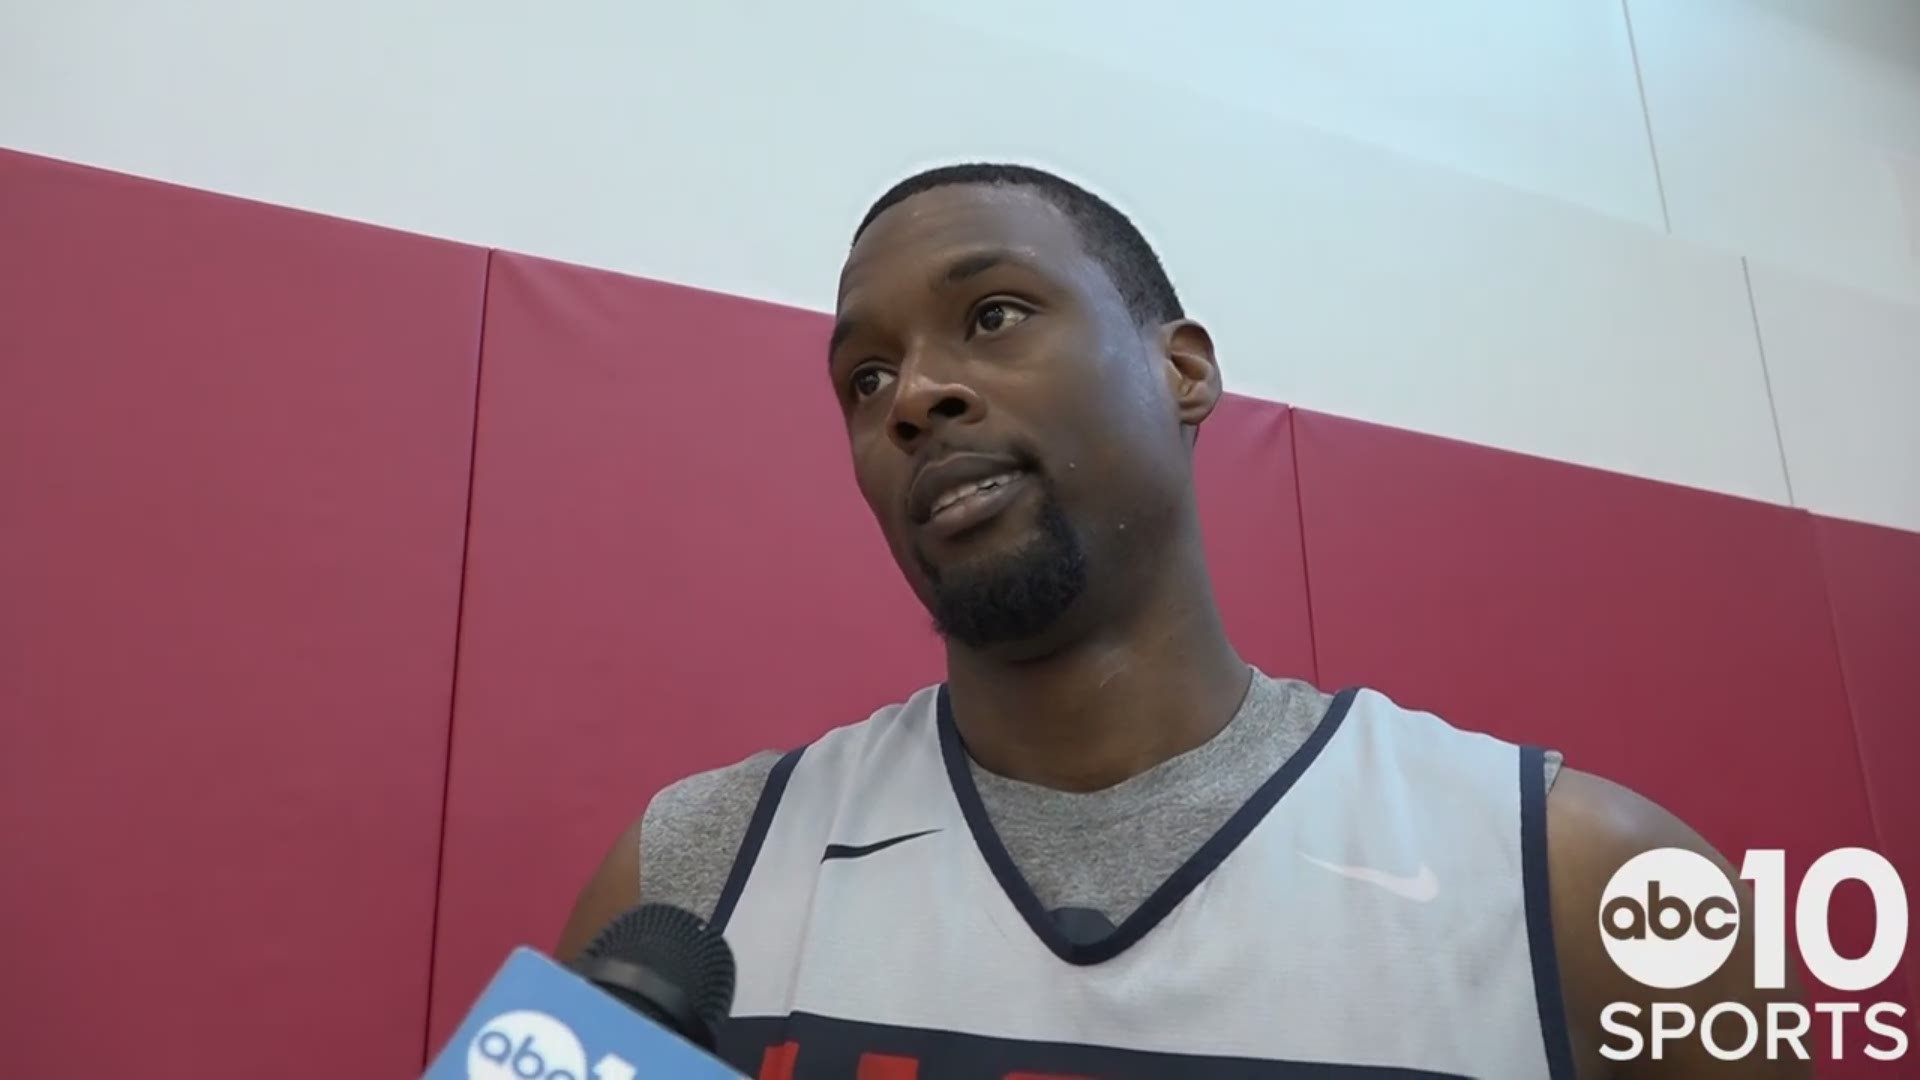 Kings forward Harrison Barnes talks about why he will never turn down an invitation to play for USA Basketball, even after winning an Olympic gold medal, having his Sacramento teammate De'Aaron Fox with him on the national squad and why he thinks Fox will make the FIBA World Cup roster.